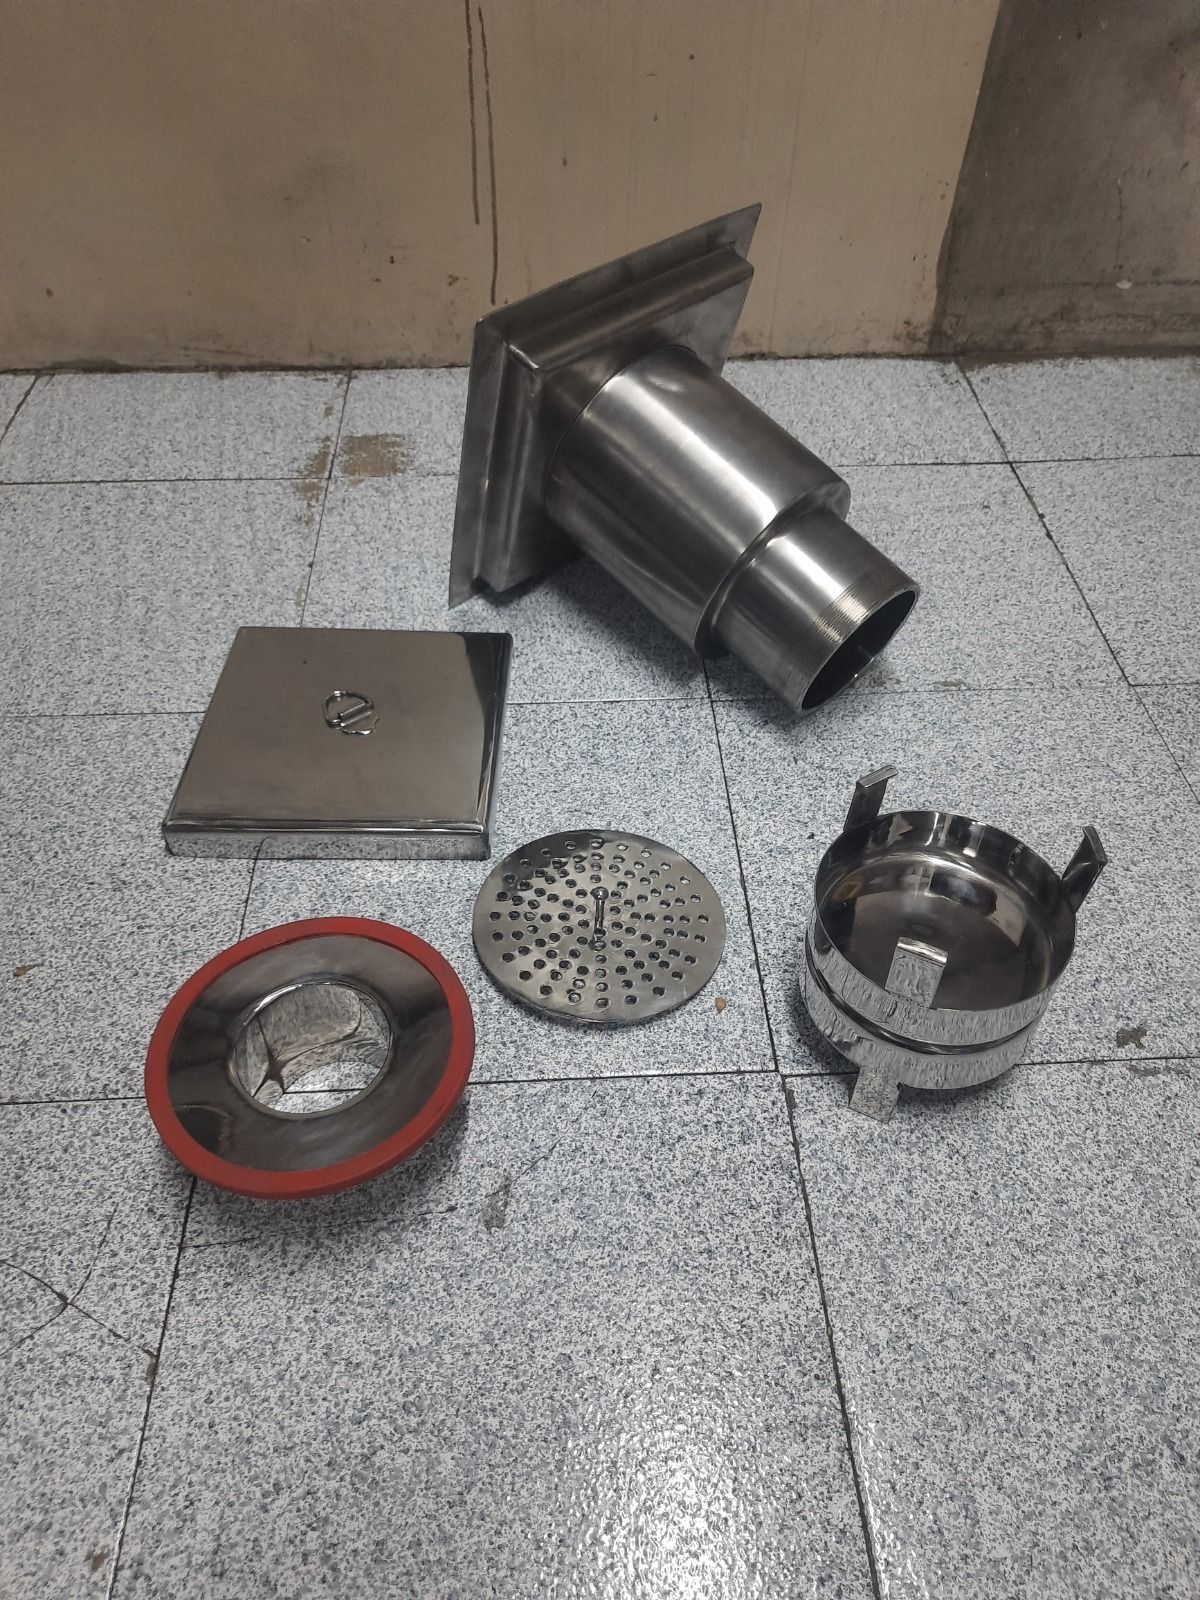 Stainless Steel Drain Strainers